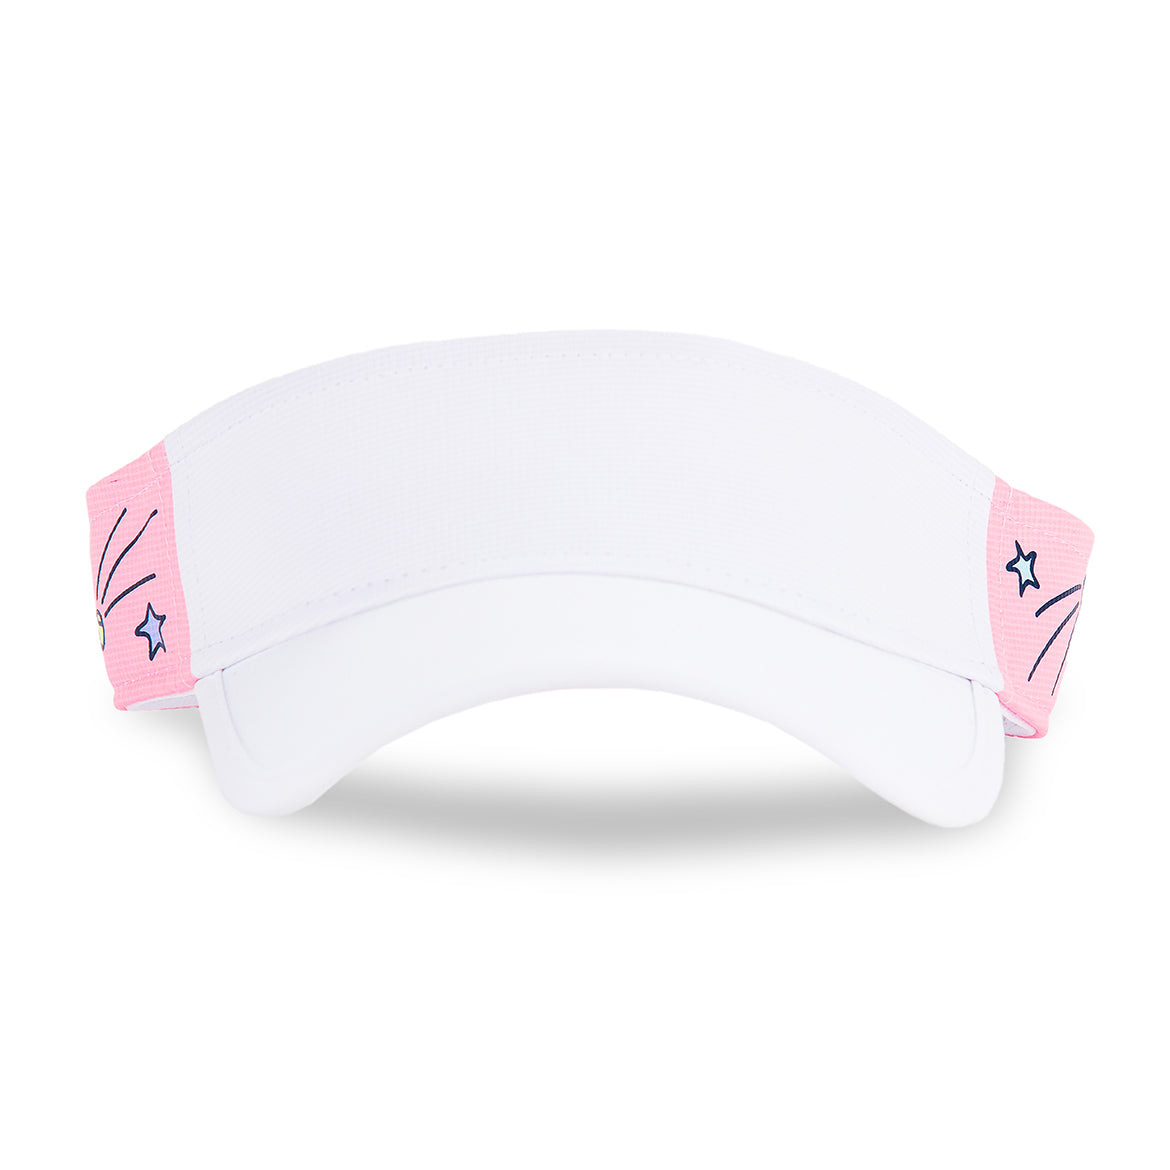 front view of light pink kids visor with shooting stars and tennis balls printed on the sides.